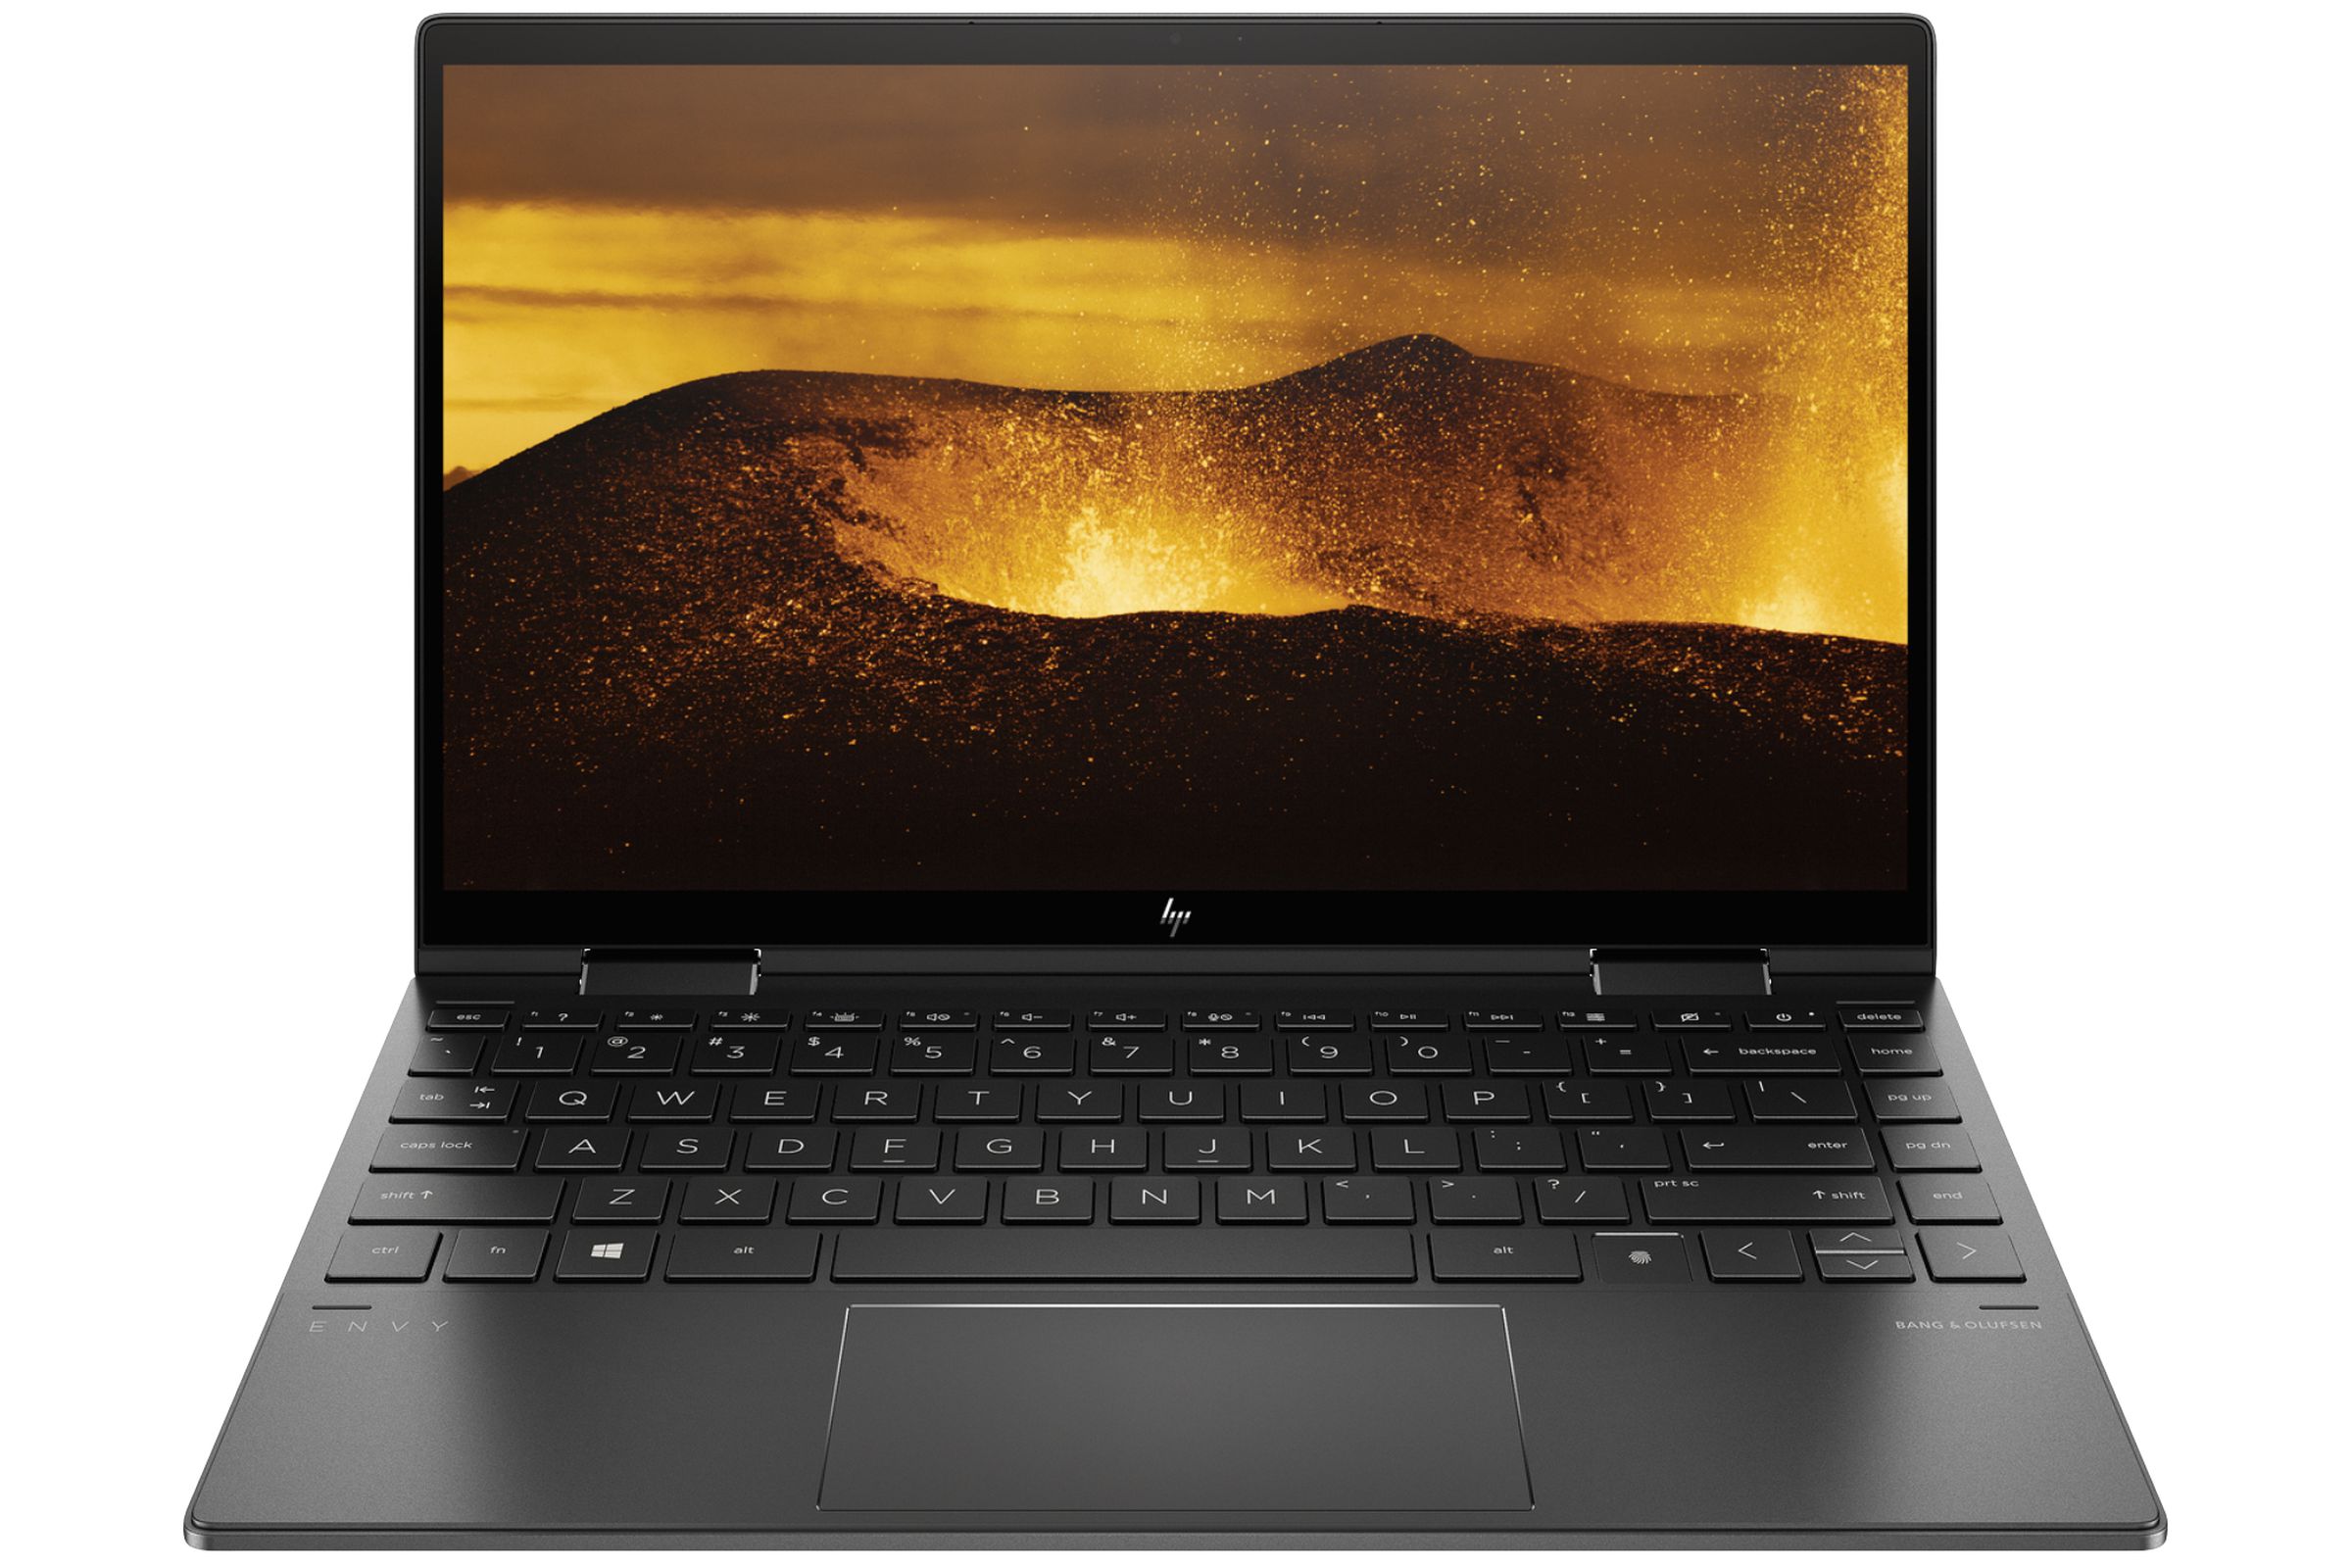 HP’s new x360 13 with the AMD Zen 2 CPU.